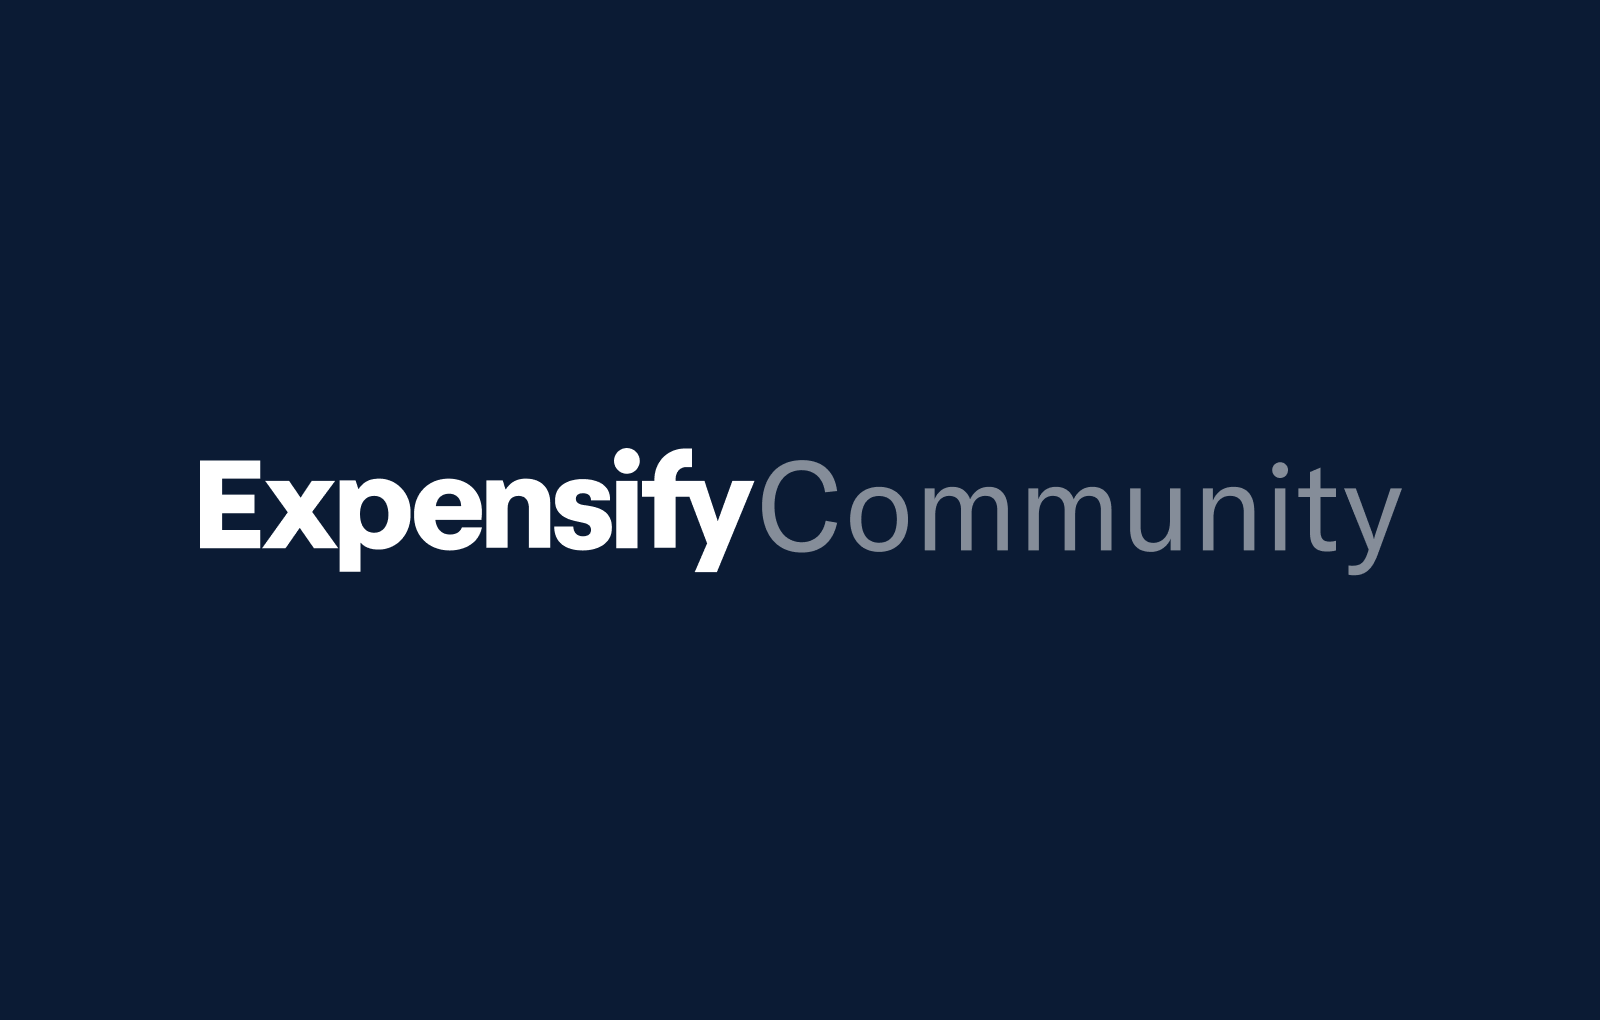 How Can I Speak to a QuickBooks EnTerPrise Support {1} 888 “960” 5414 “ Representative Fast? — Important Notice: After July 31, 2024, the Expensify community will not longer be available. Help docs and resources can be found on help.expensify.com and you can message Concierge with any additional questions.